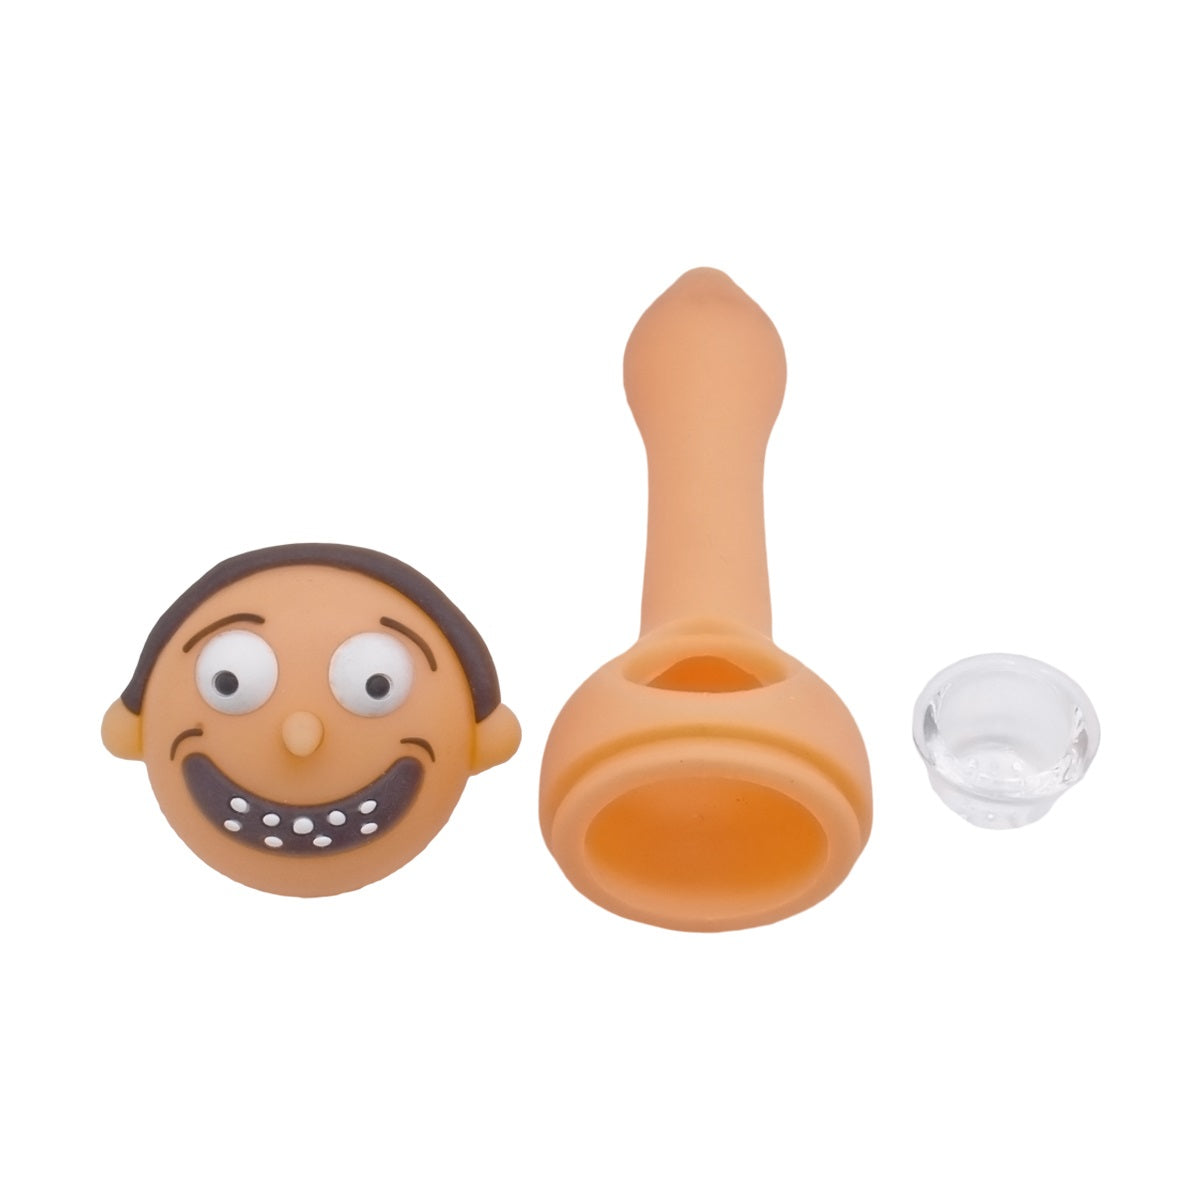 Silicone Smoking Pipe, Unbreakable with Glass Bowl, Rick Morty-2, Orange